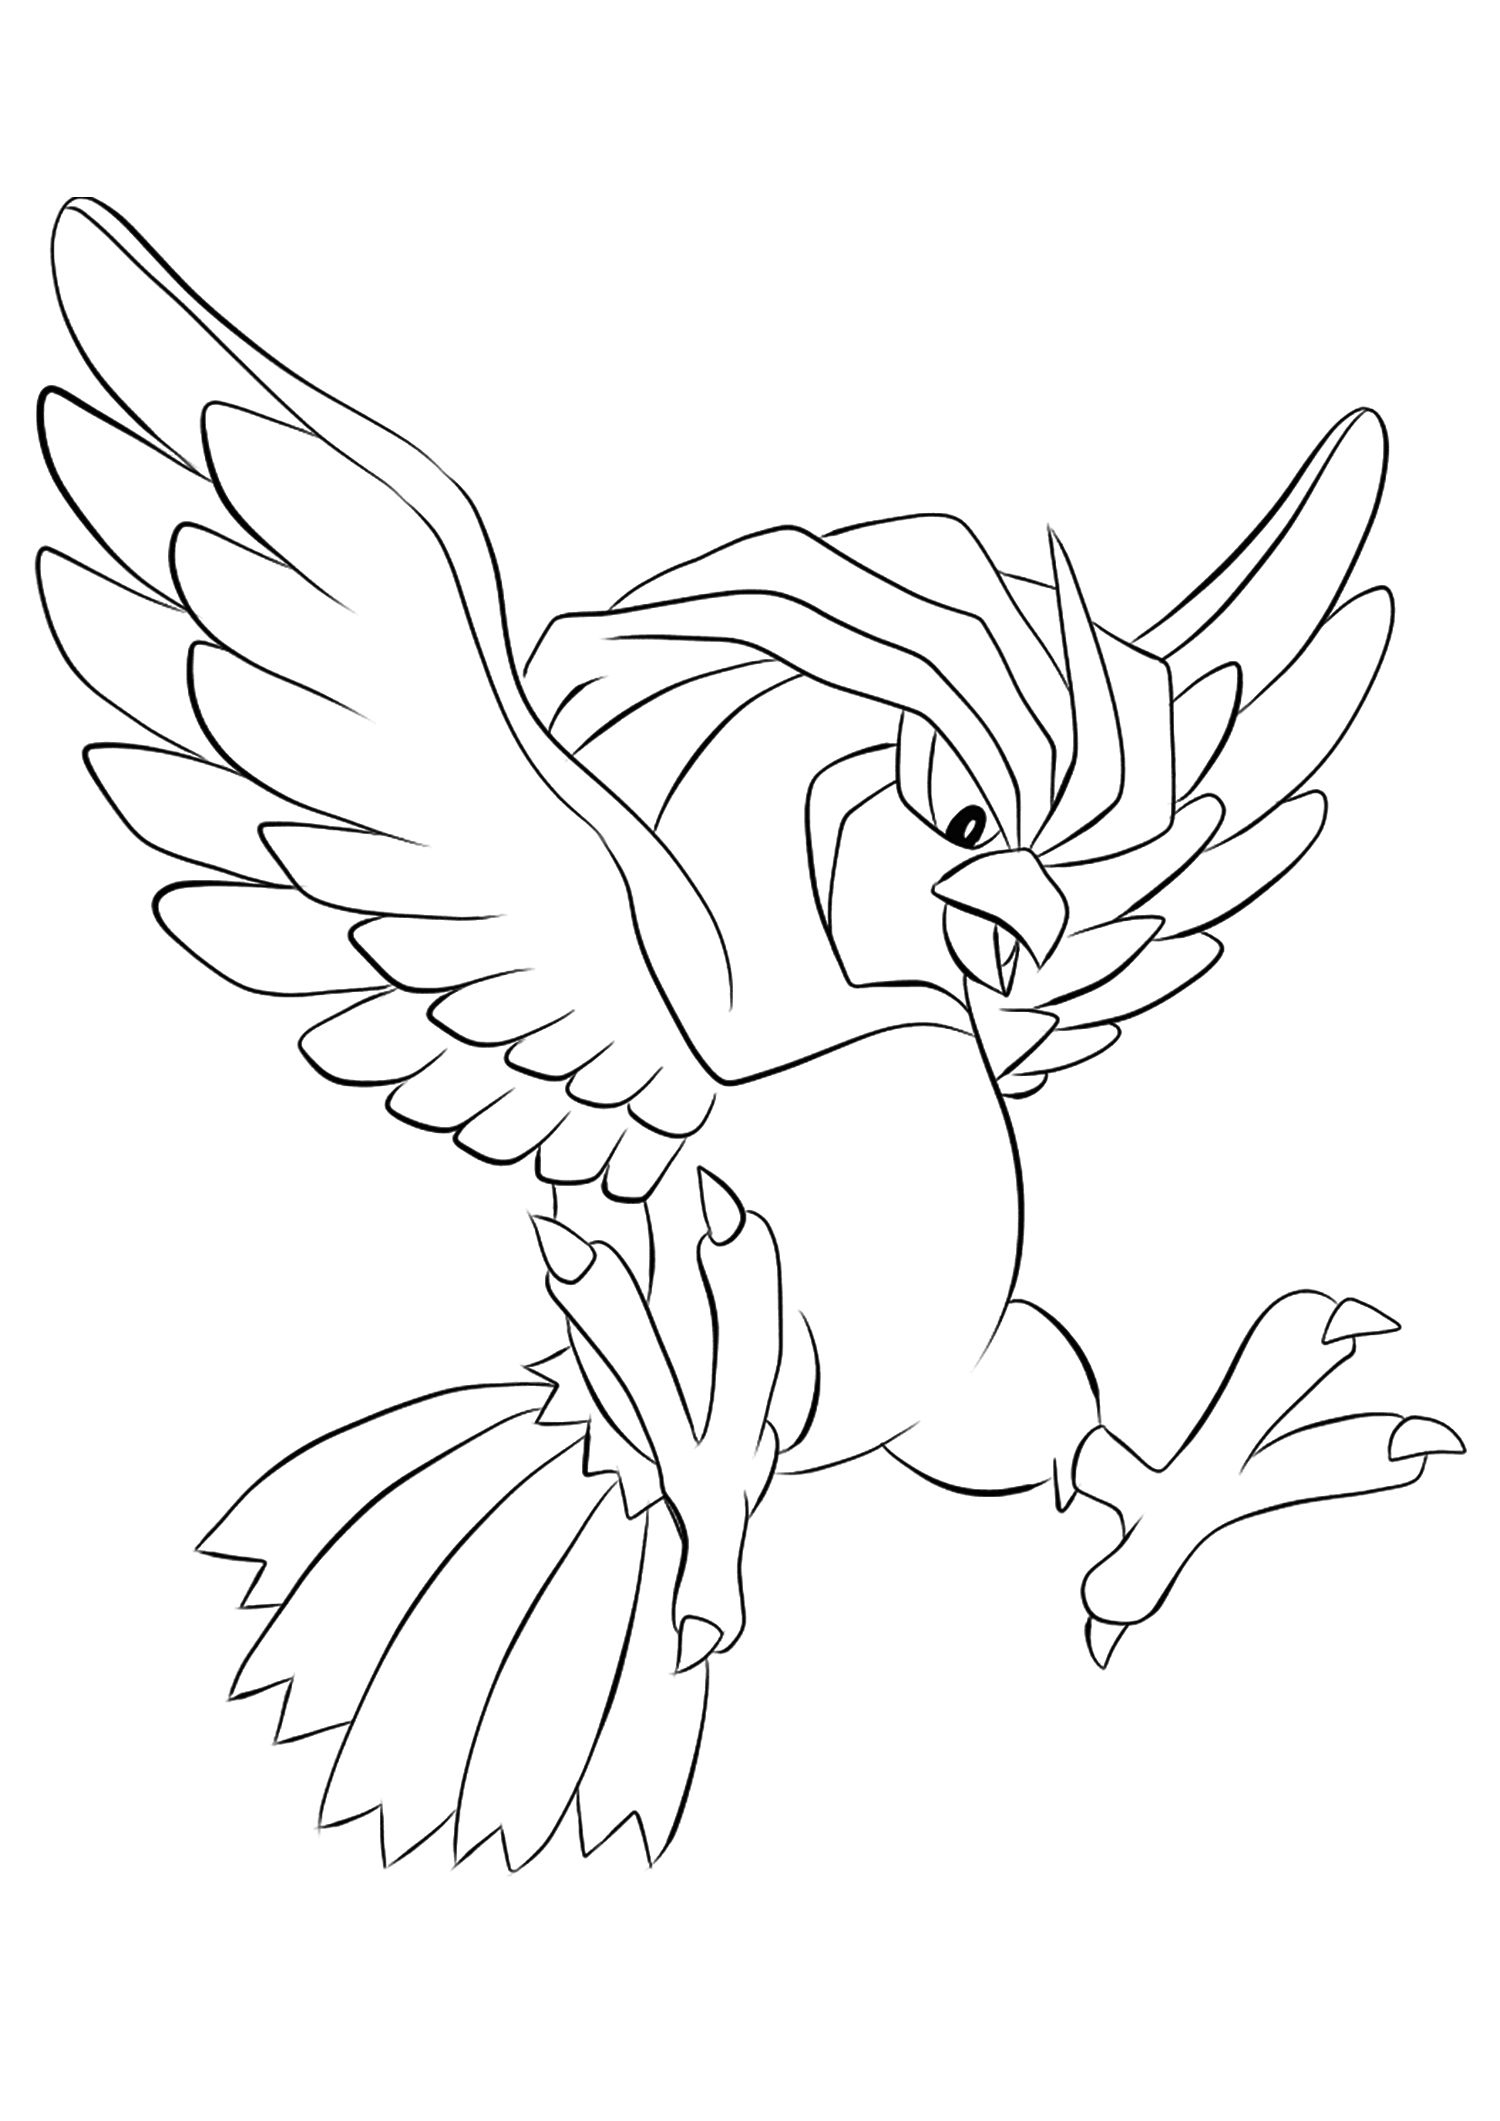 legendary bird pokemon coloring pages